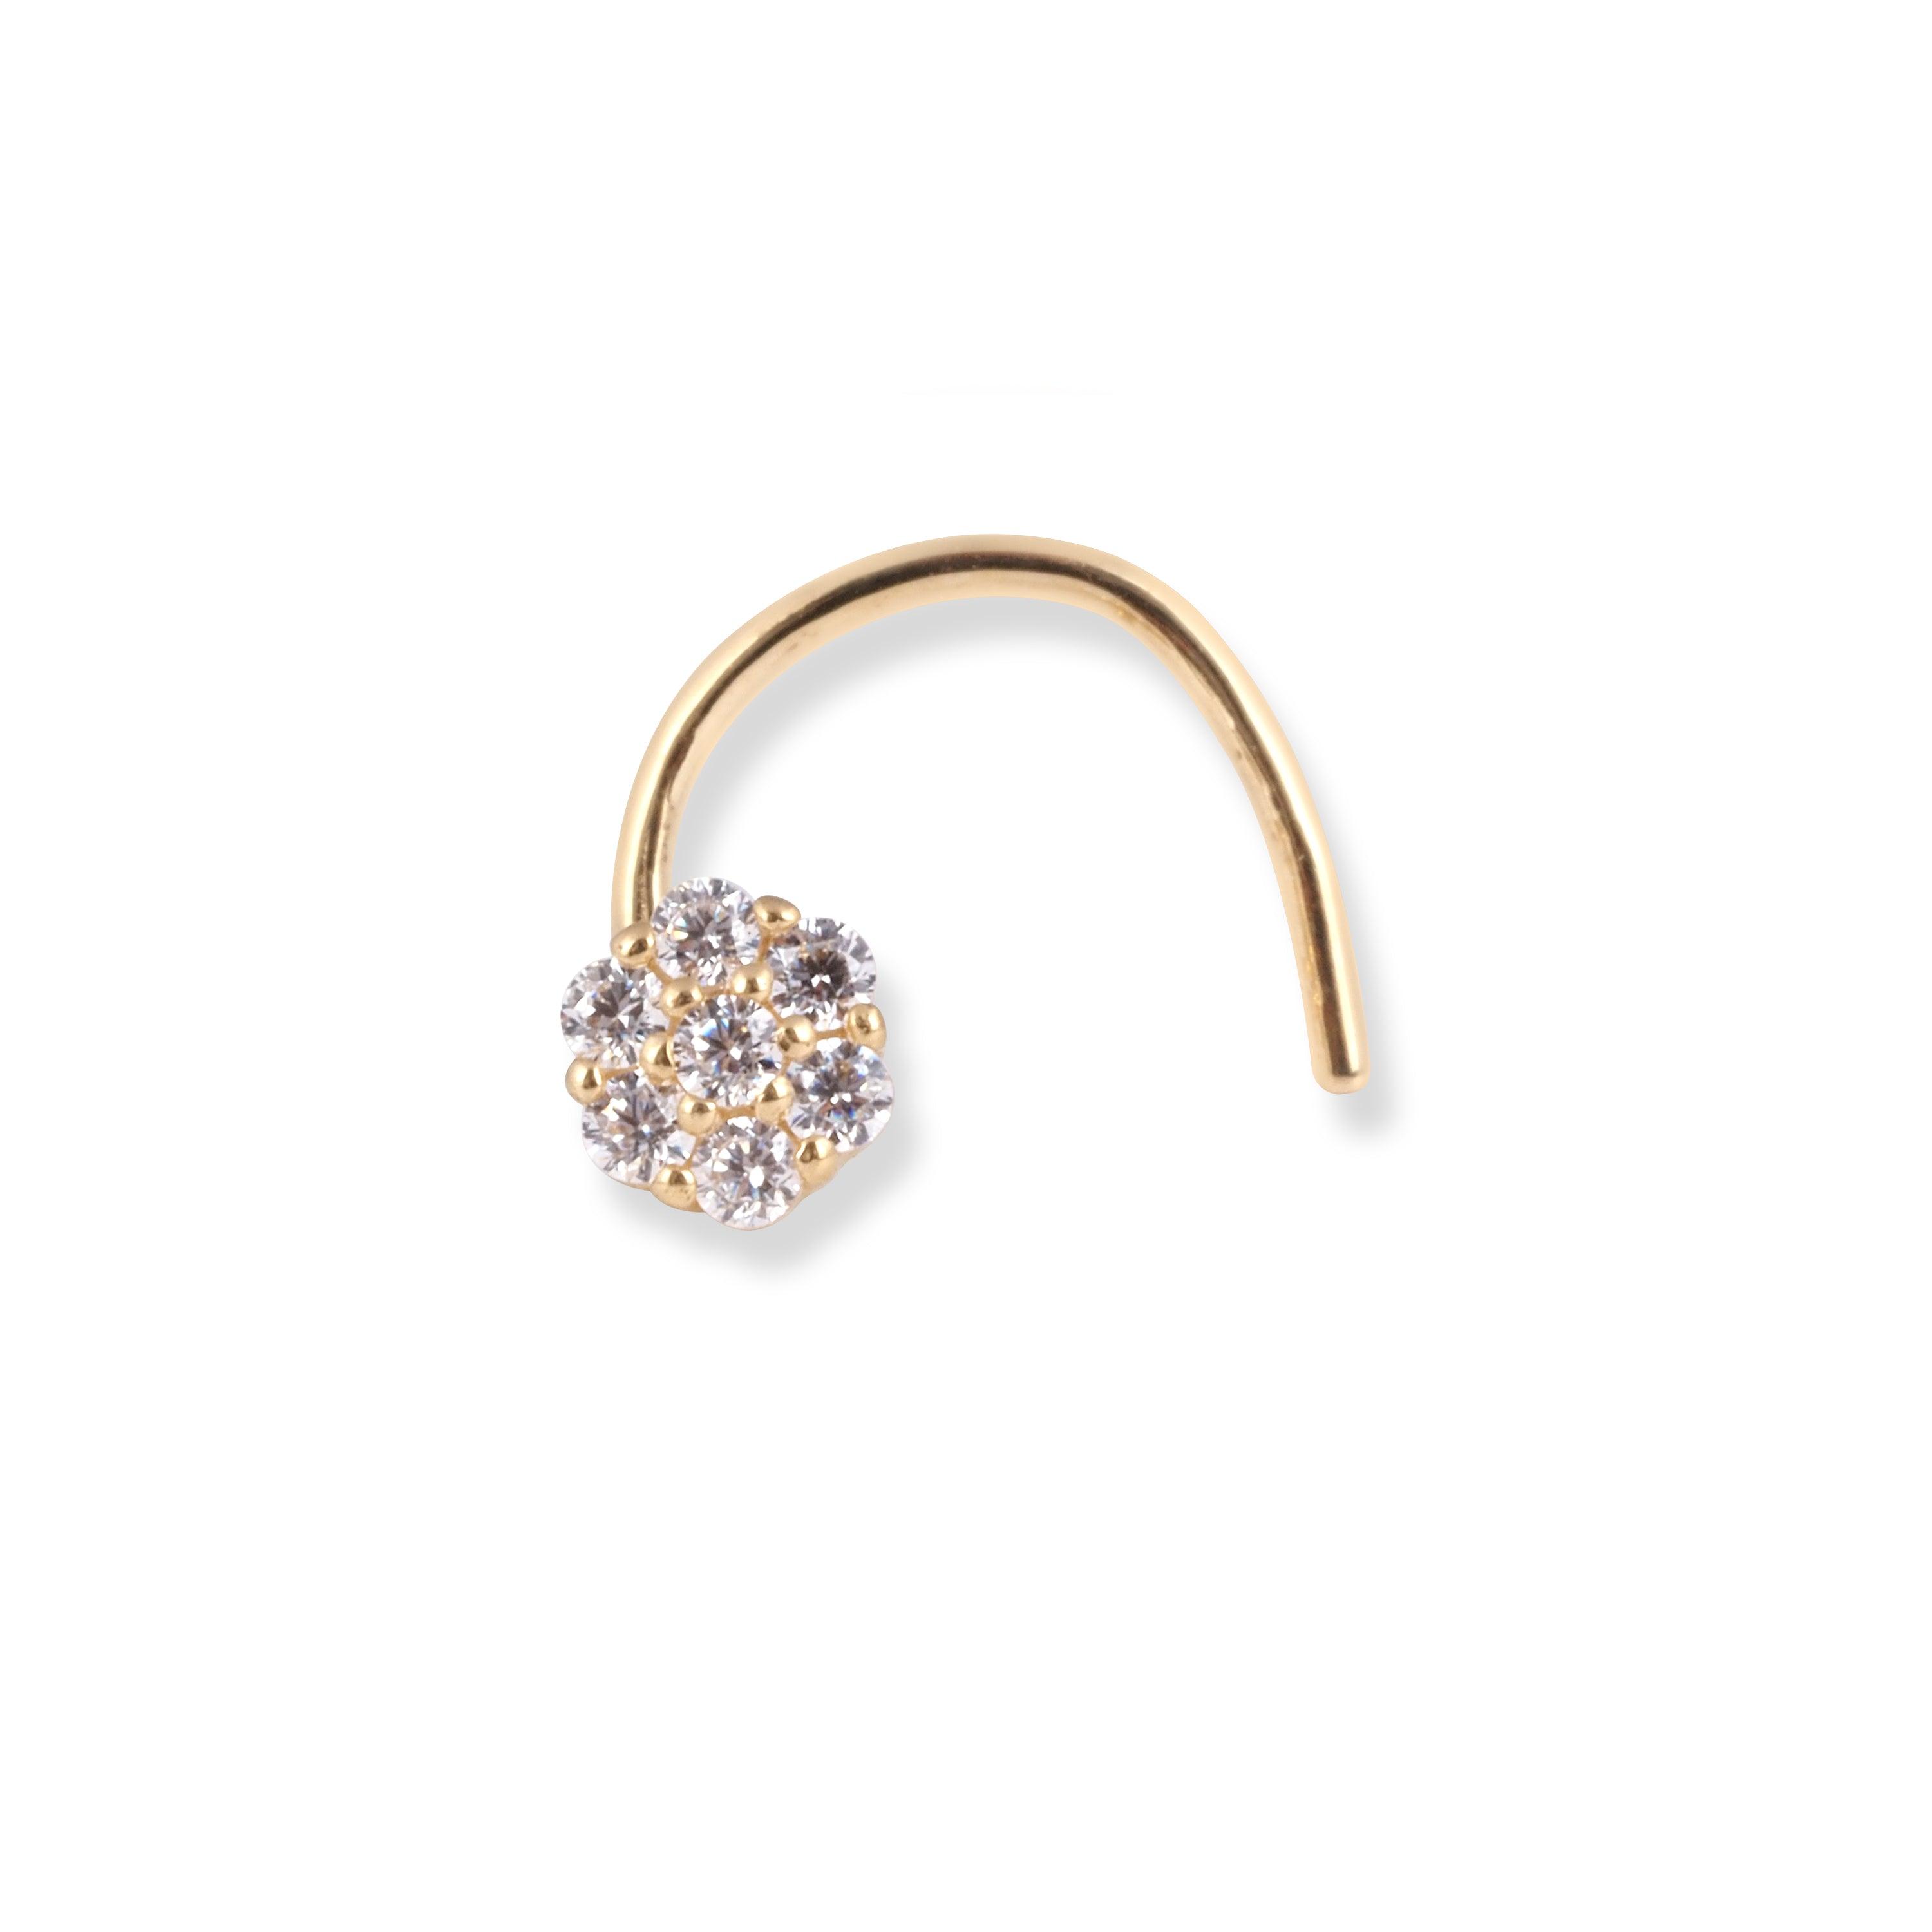 18ct Yellow Gold Flower Design Wire Back Nose Stud with 7 White Cubic Zirconia Stones NS-7571 - Minar Jewellers